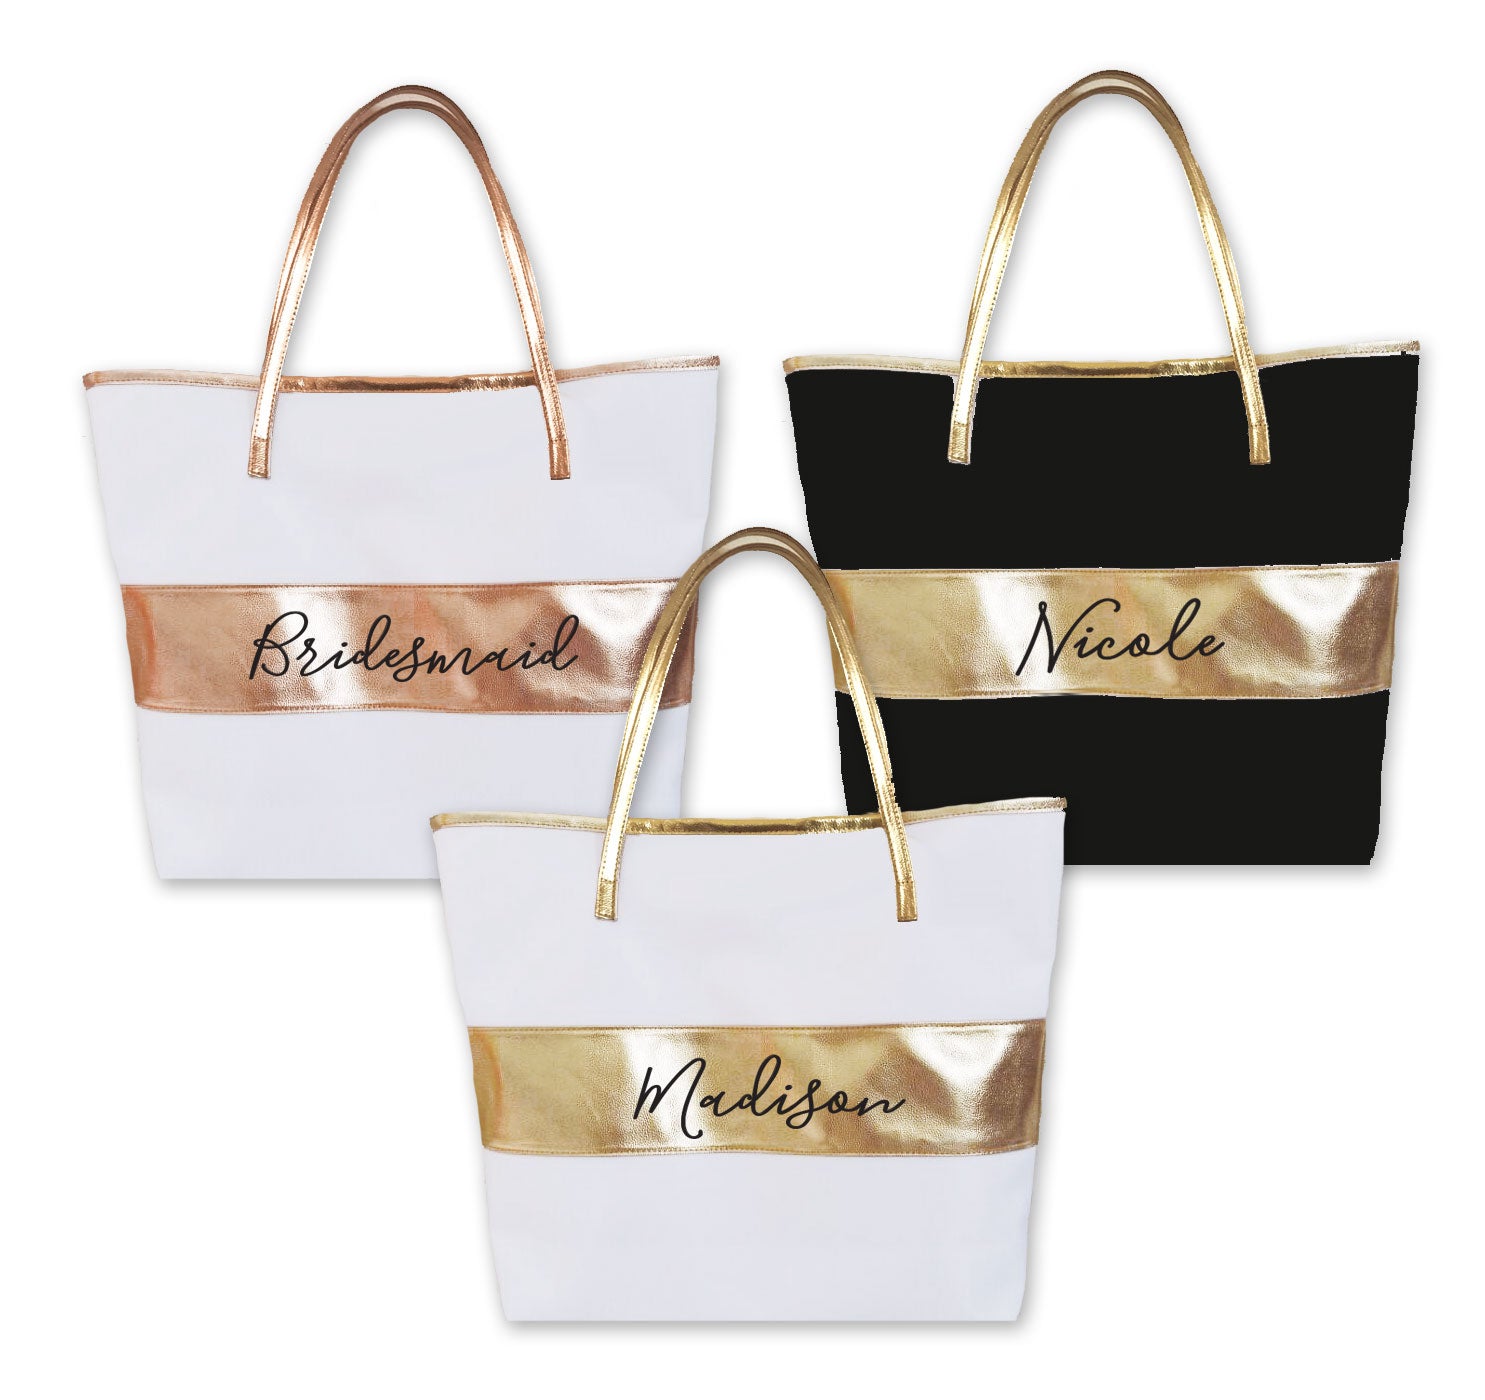 Tribal Name Personalized Small Canvas Tote Bag